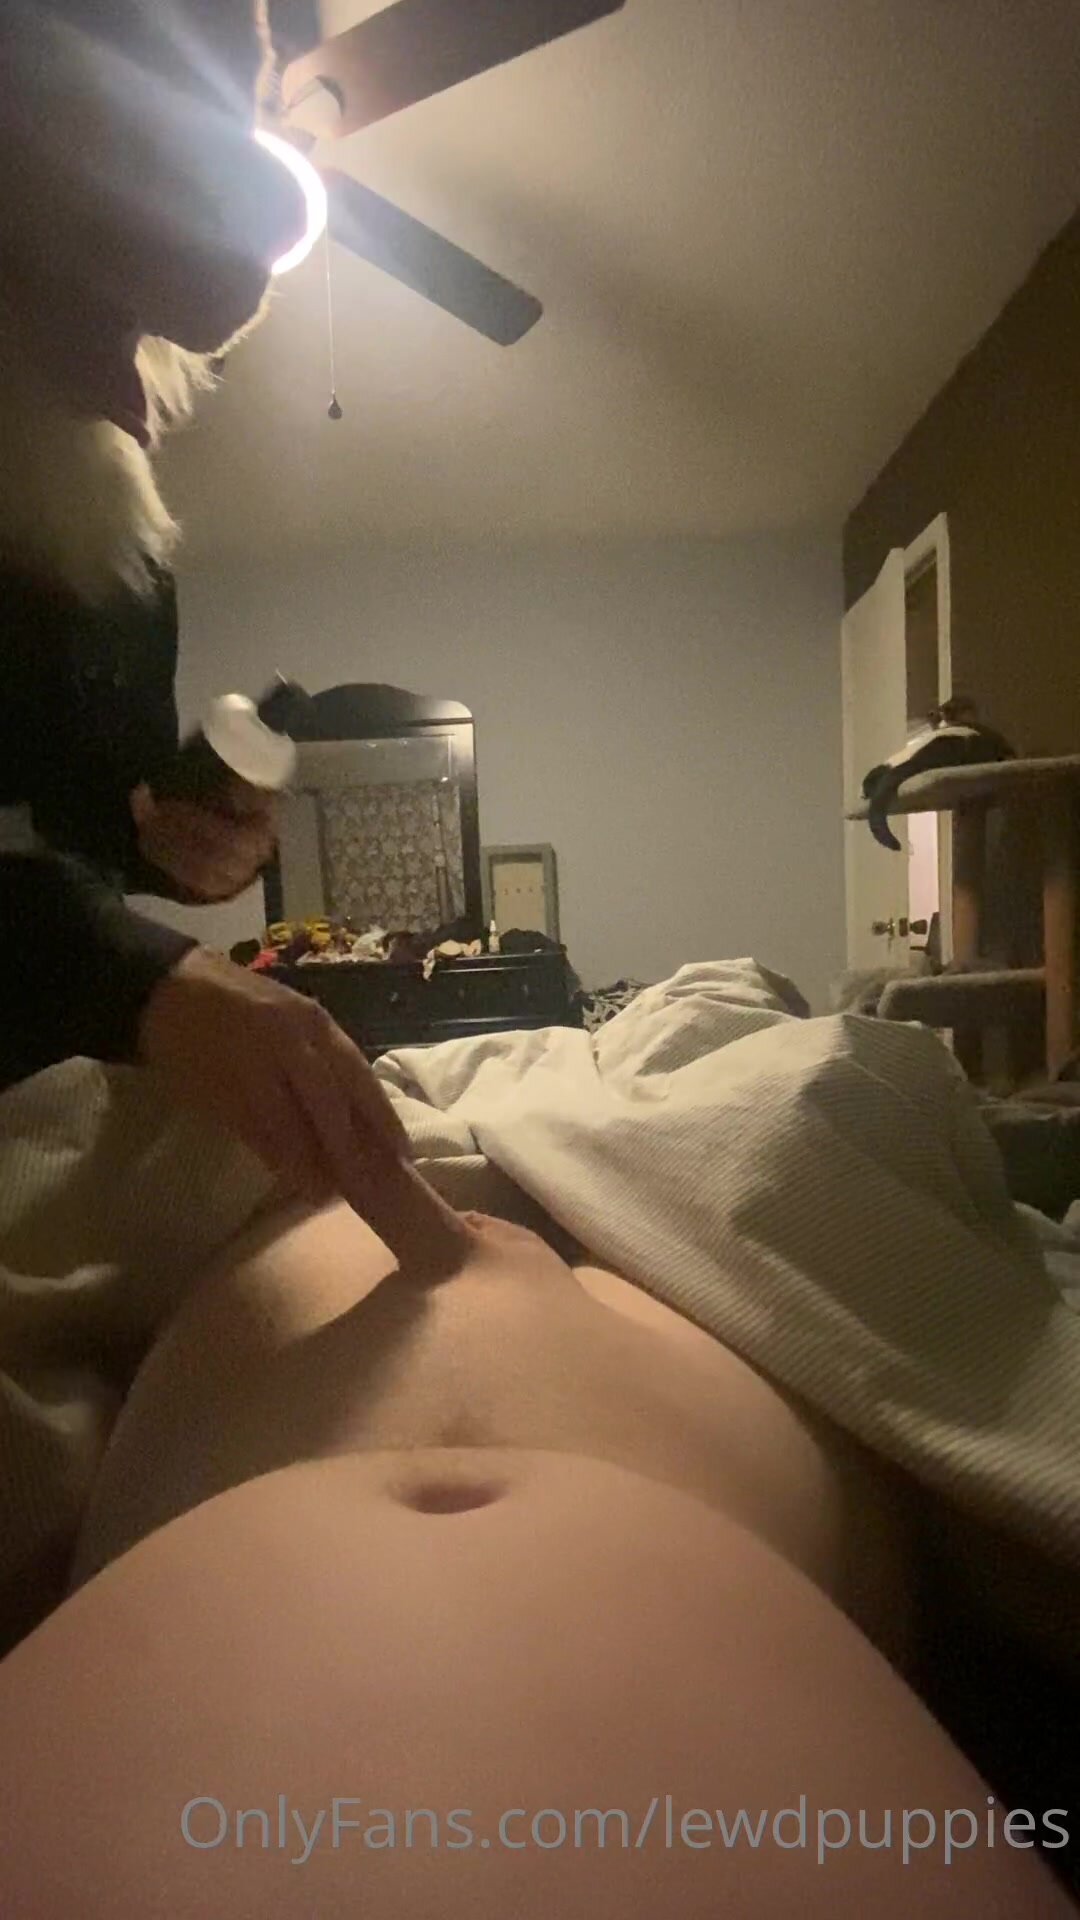 Fursuit handjob female laying on the bed